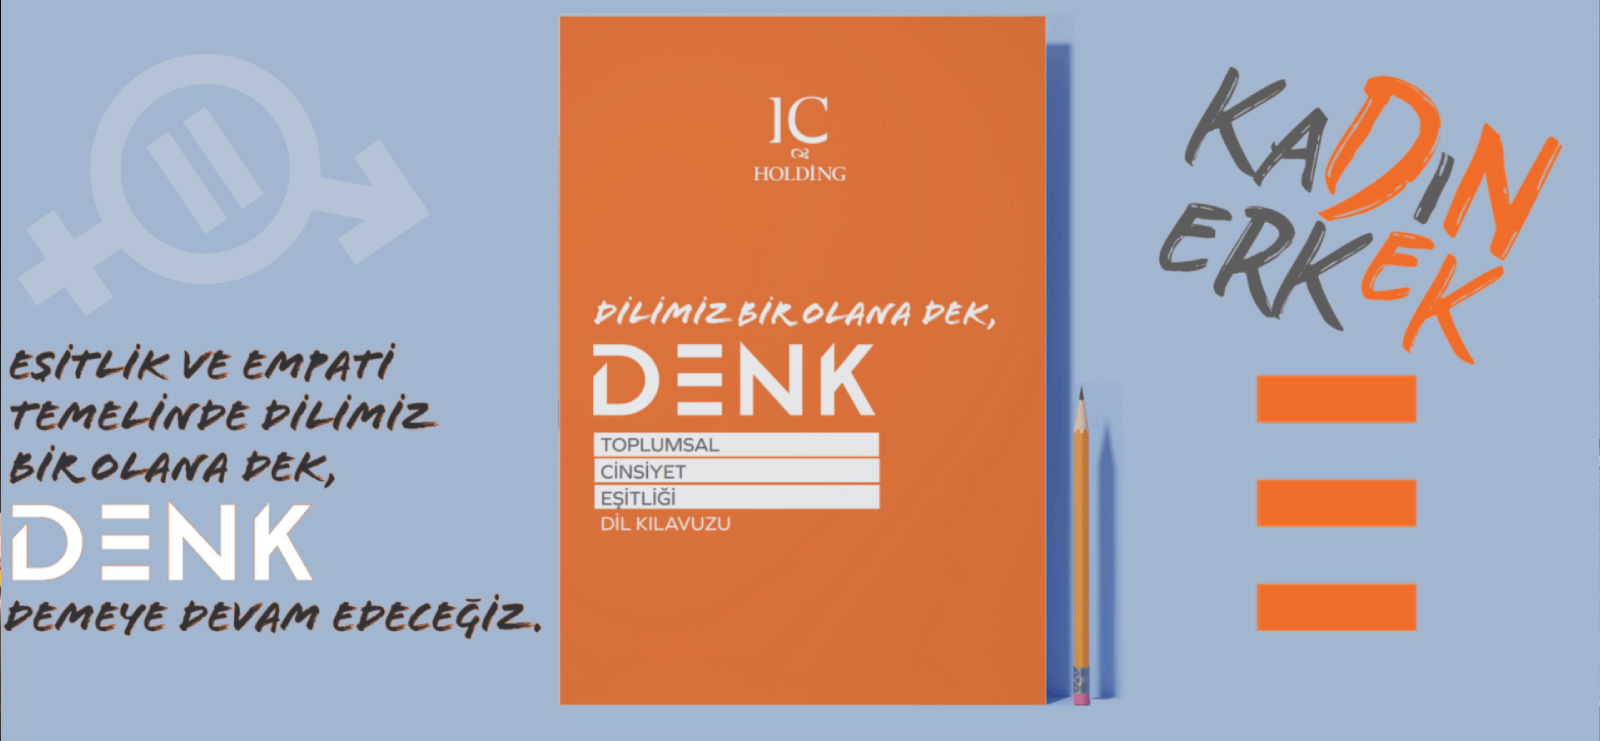 "DENK" Gender Equality - Inclusive Language Guideline is now available.